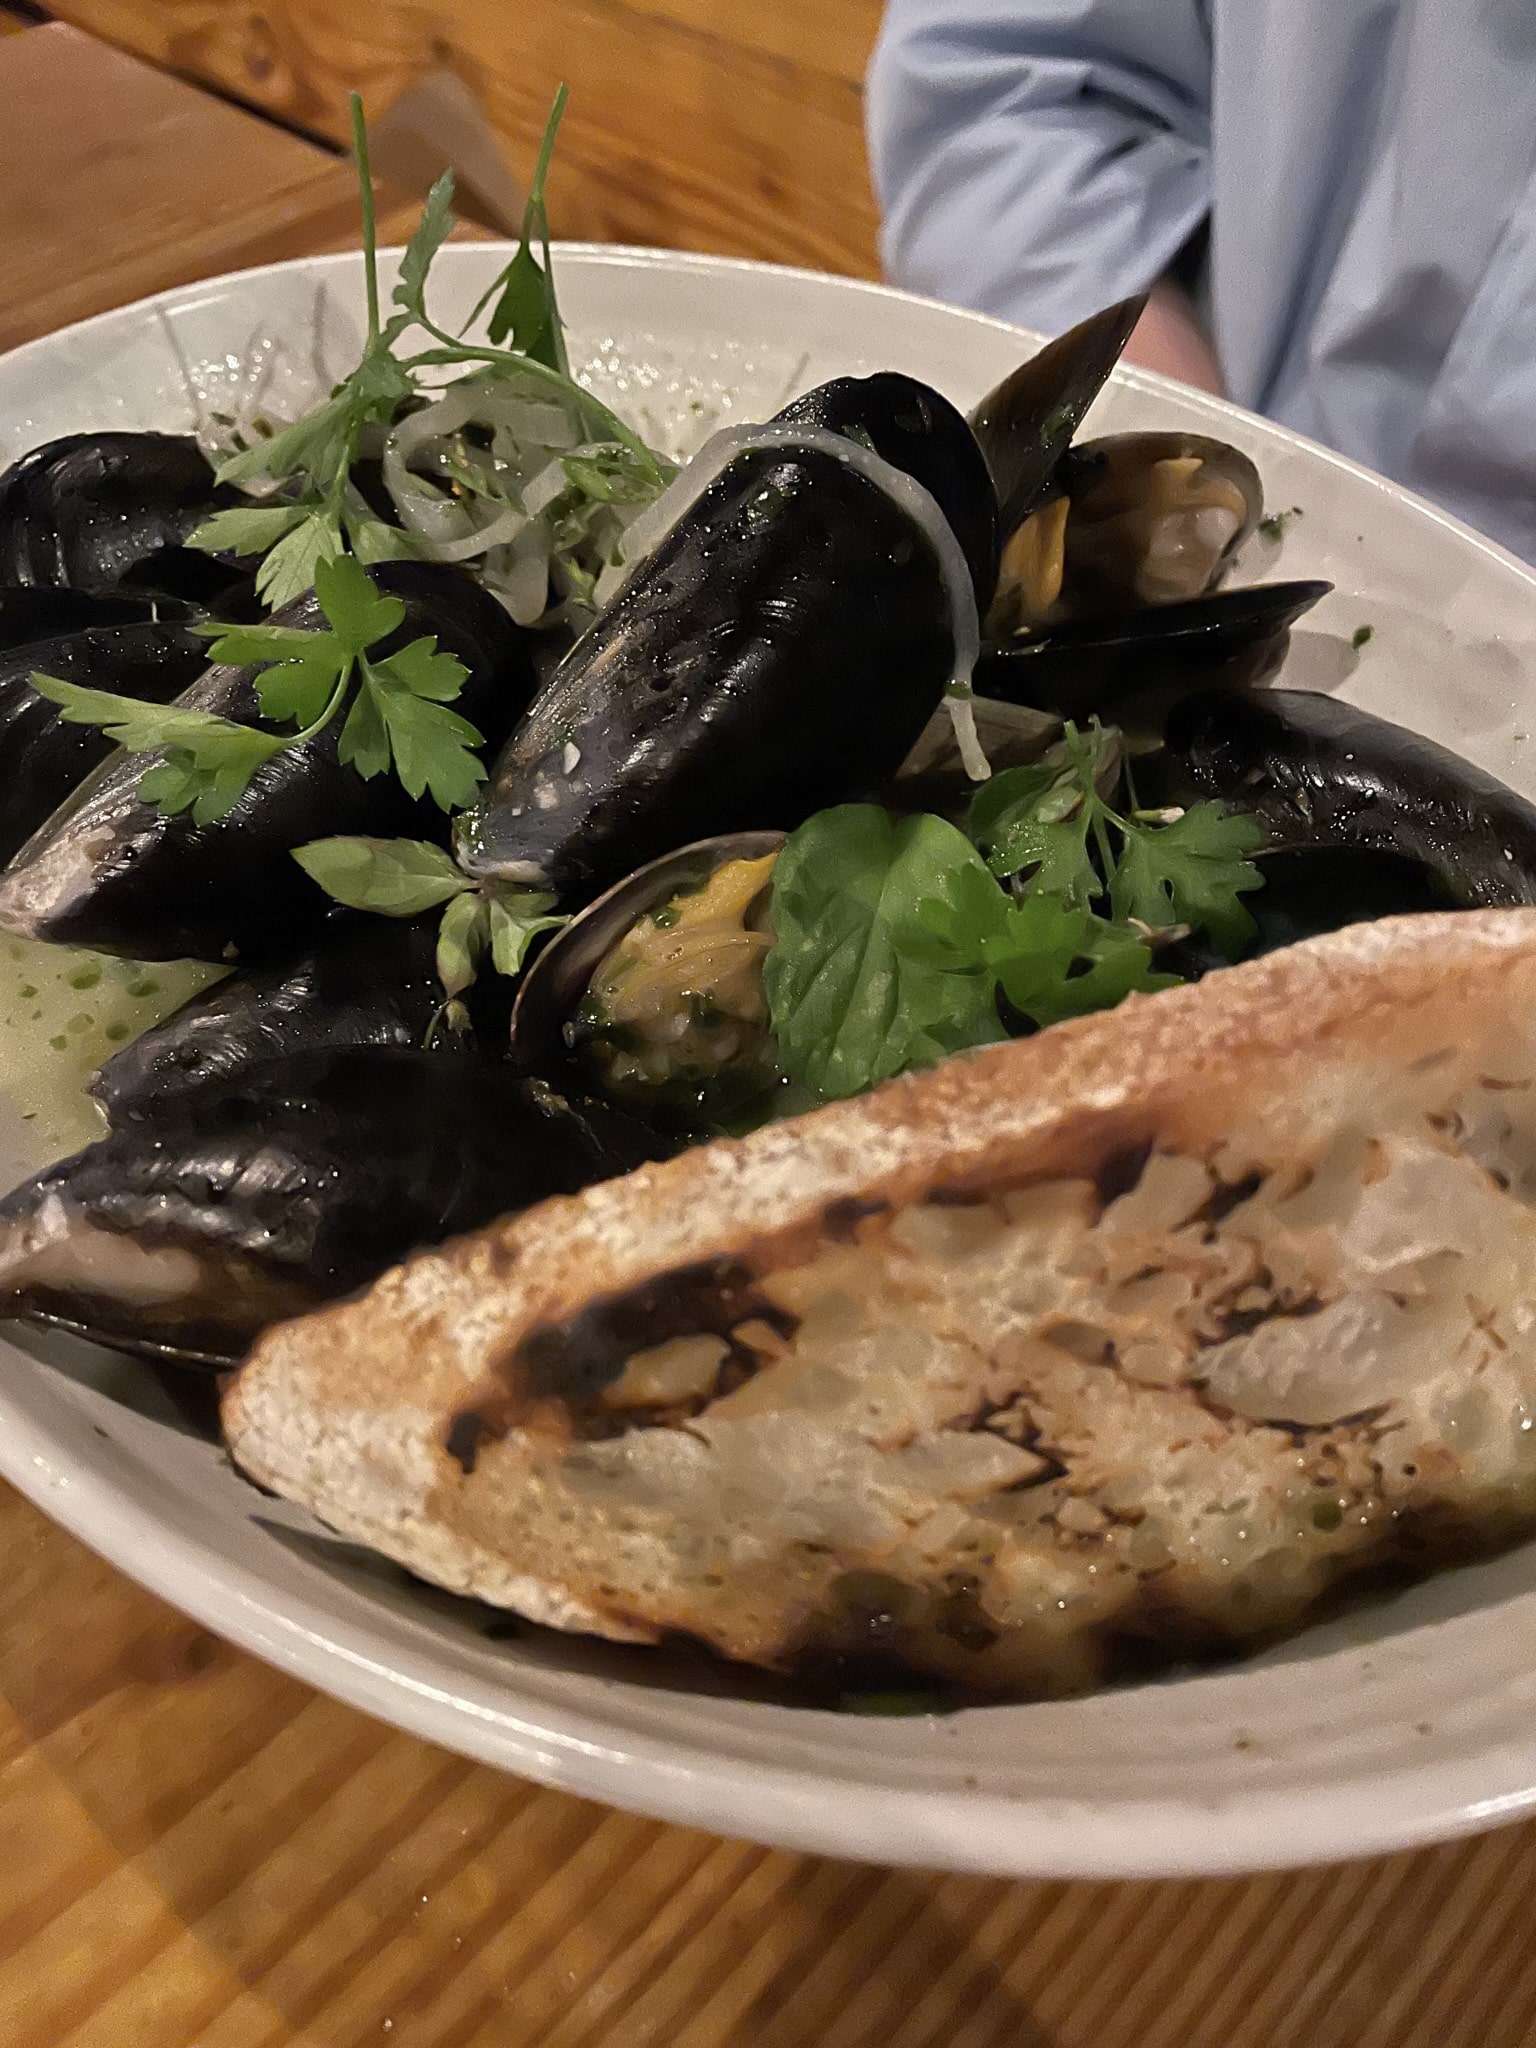 Taylor Shellfish Clams & Mussels